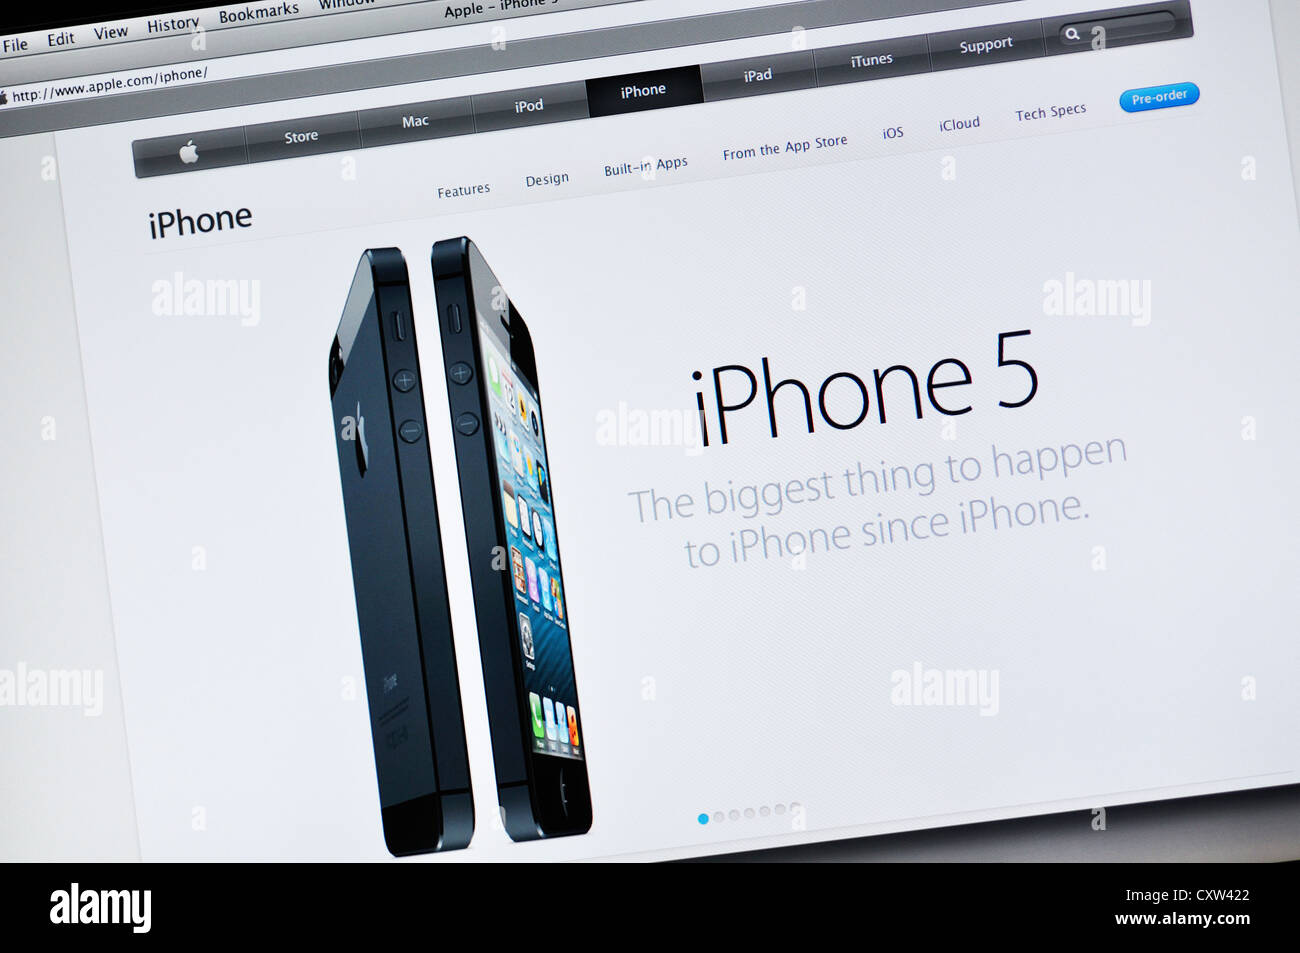 History of iPhone 5: The biggest thing to happen to iPhone